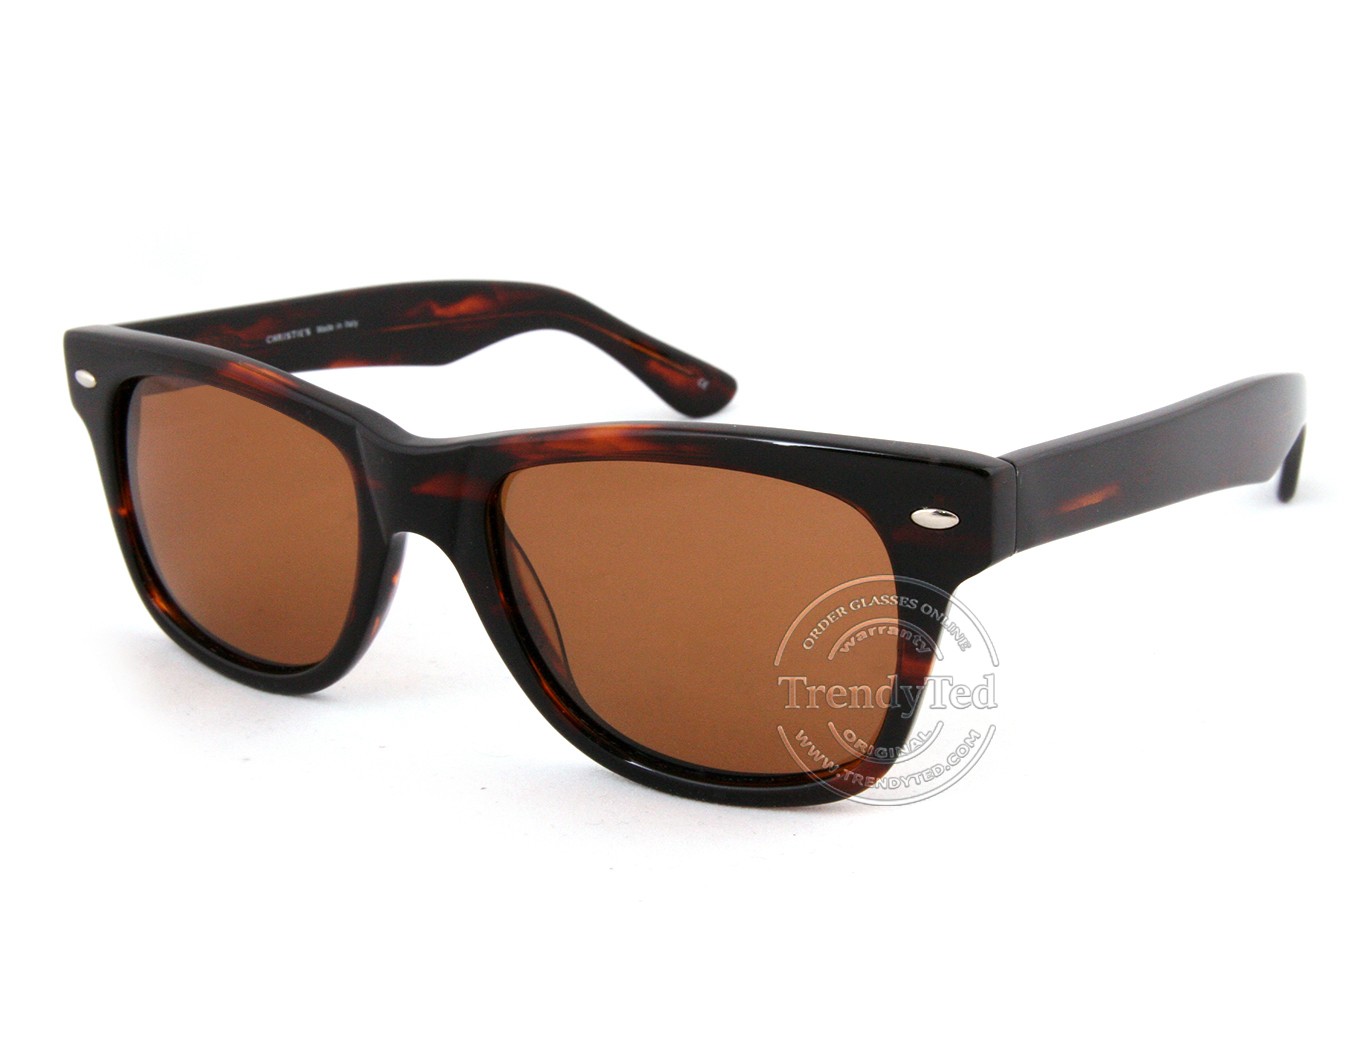 Christie's sunglasses | Christie's shades prices & models